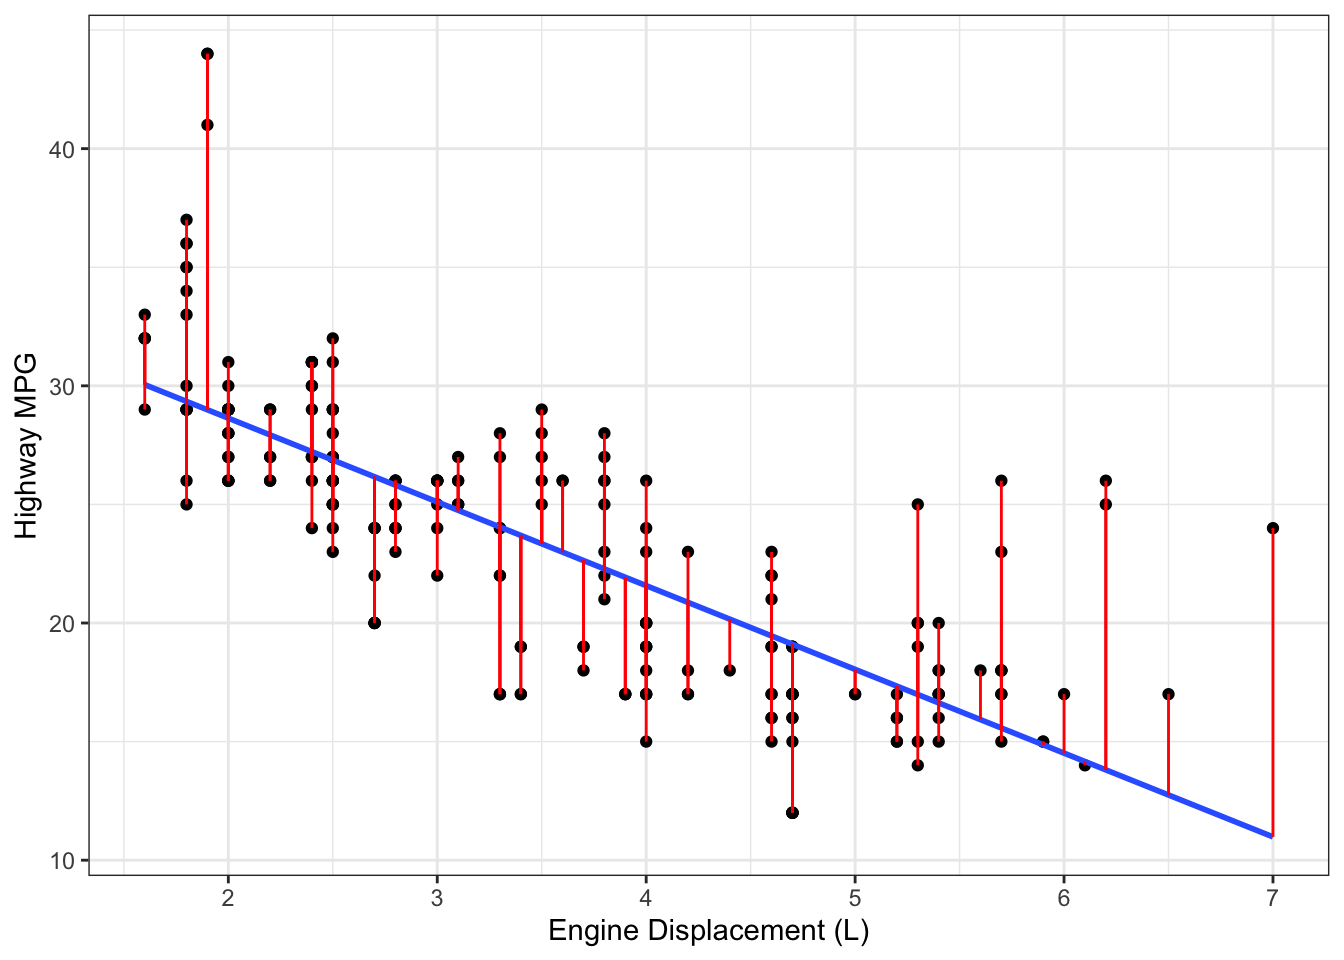 Data, regression line (black) and residuals (red) from a simple linear regression fit to fuel efficiency data.